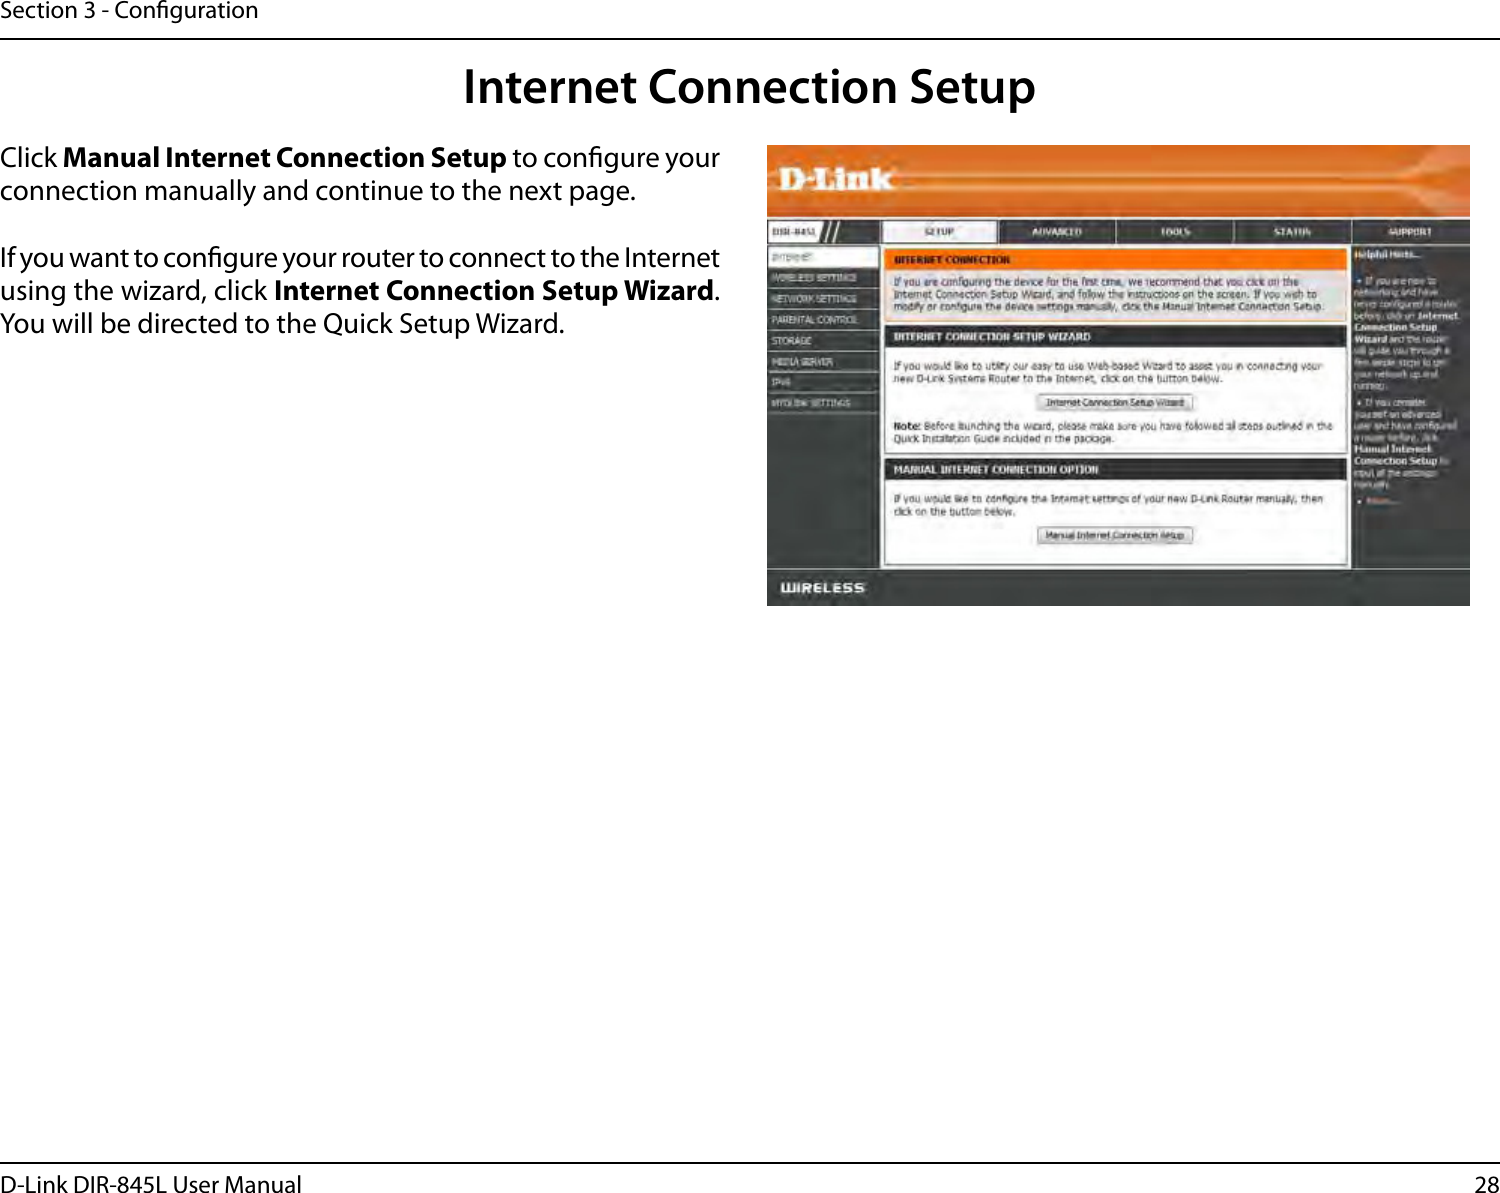 28D-Link DIR-845L User ManualSection 3 - CongurationInternet Connection SetupClick Manual Internet Connection Setup to congure your connection manually and continue to the next page.If you want to congure your router to connect to the Internet using the wizard, click Internet Connection Setup Wizard. You will be directed to the Quick Setup Wizard. 